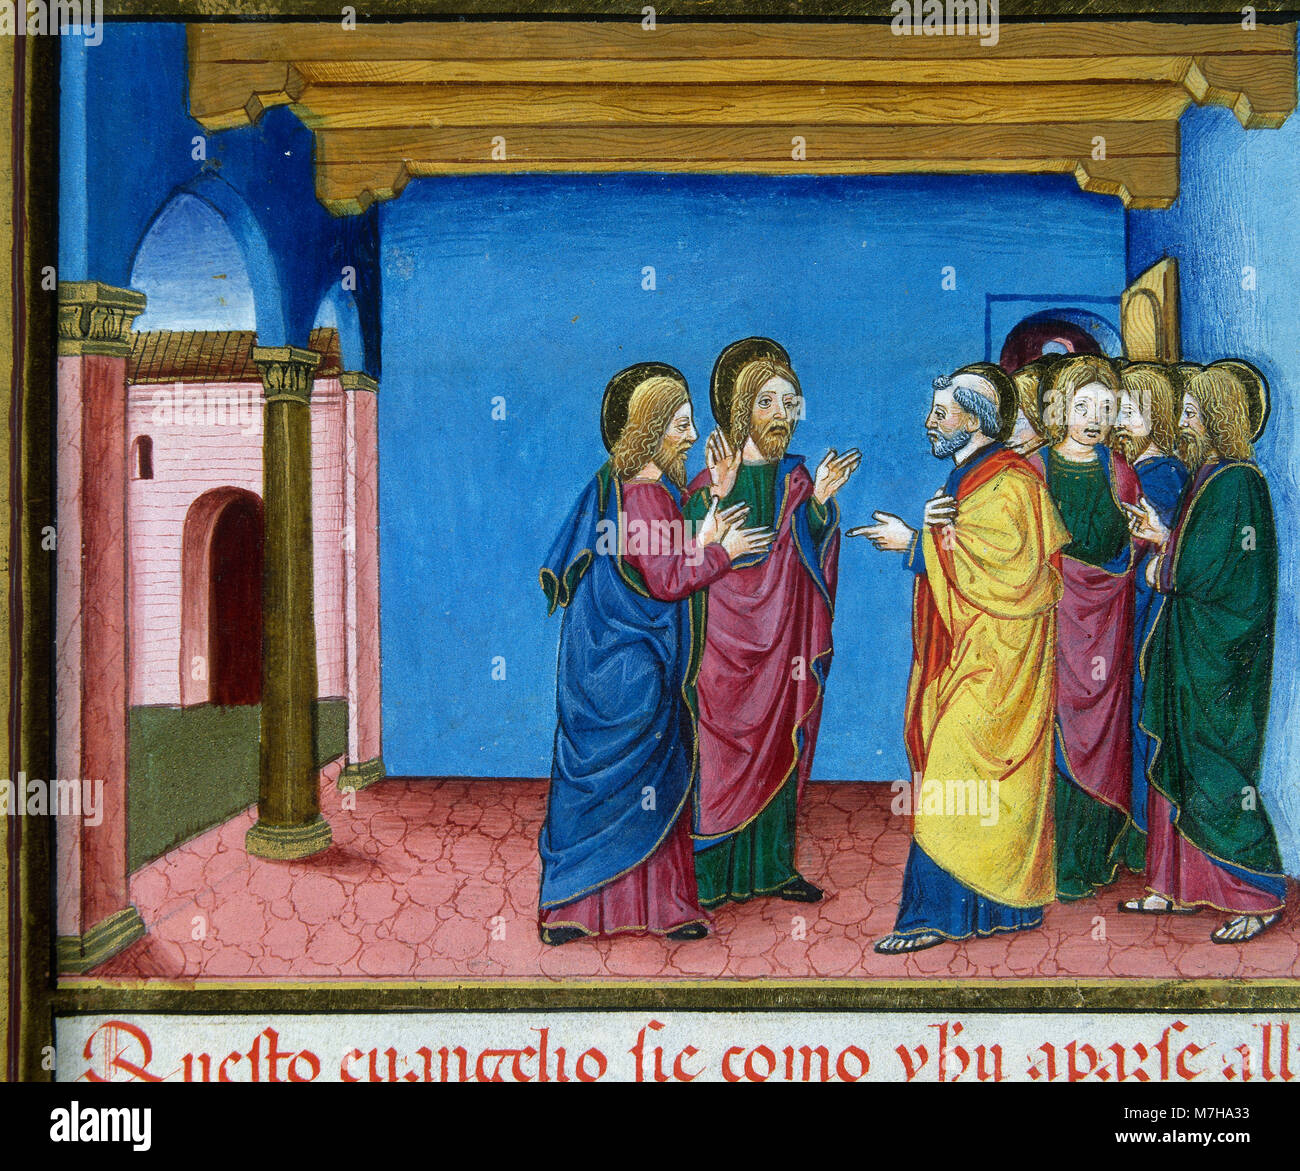 The disciples go to Jerusalem, by orden of Jesus, to tell what happenned. Codex of Predis, 1476. Royal Library. Turin. Italy. Stock Photo